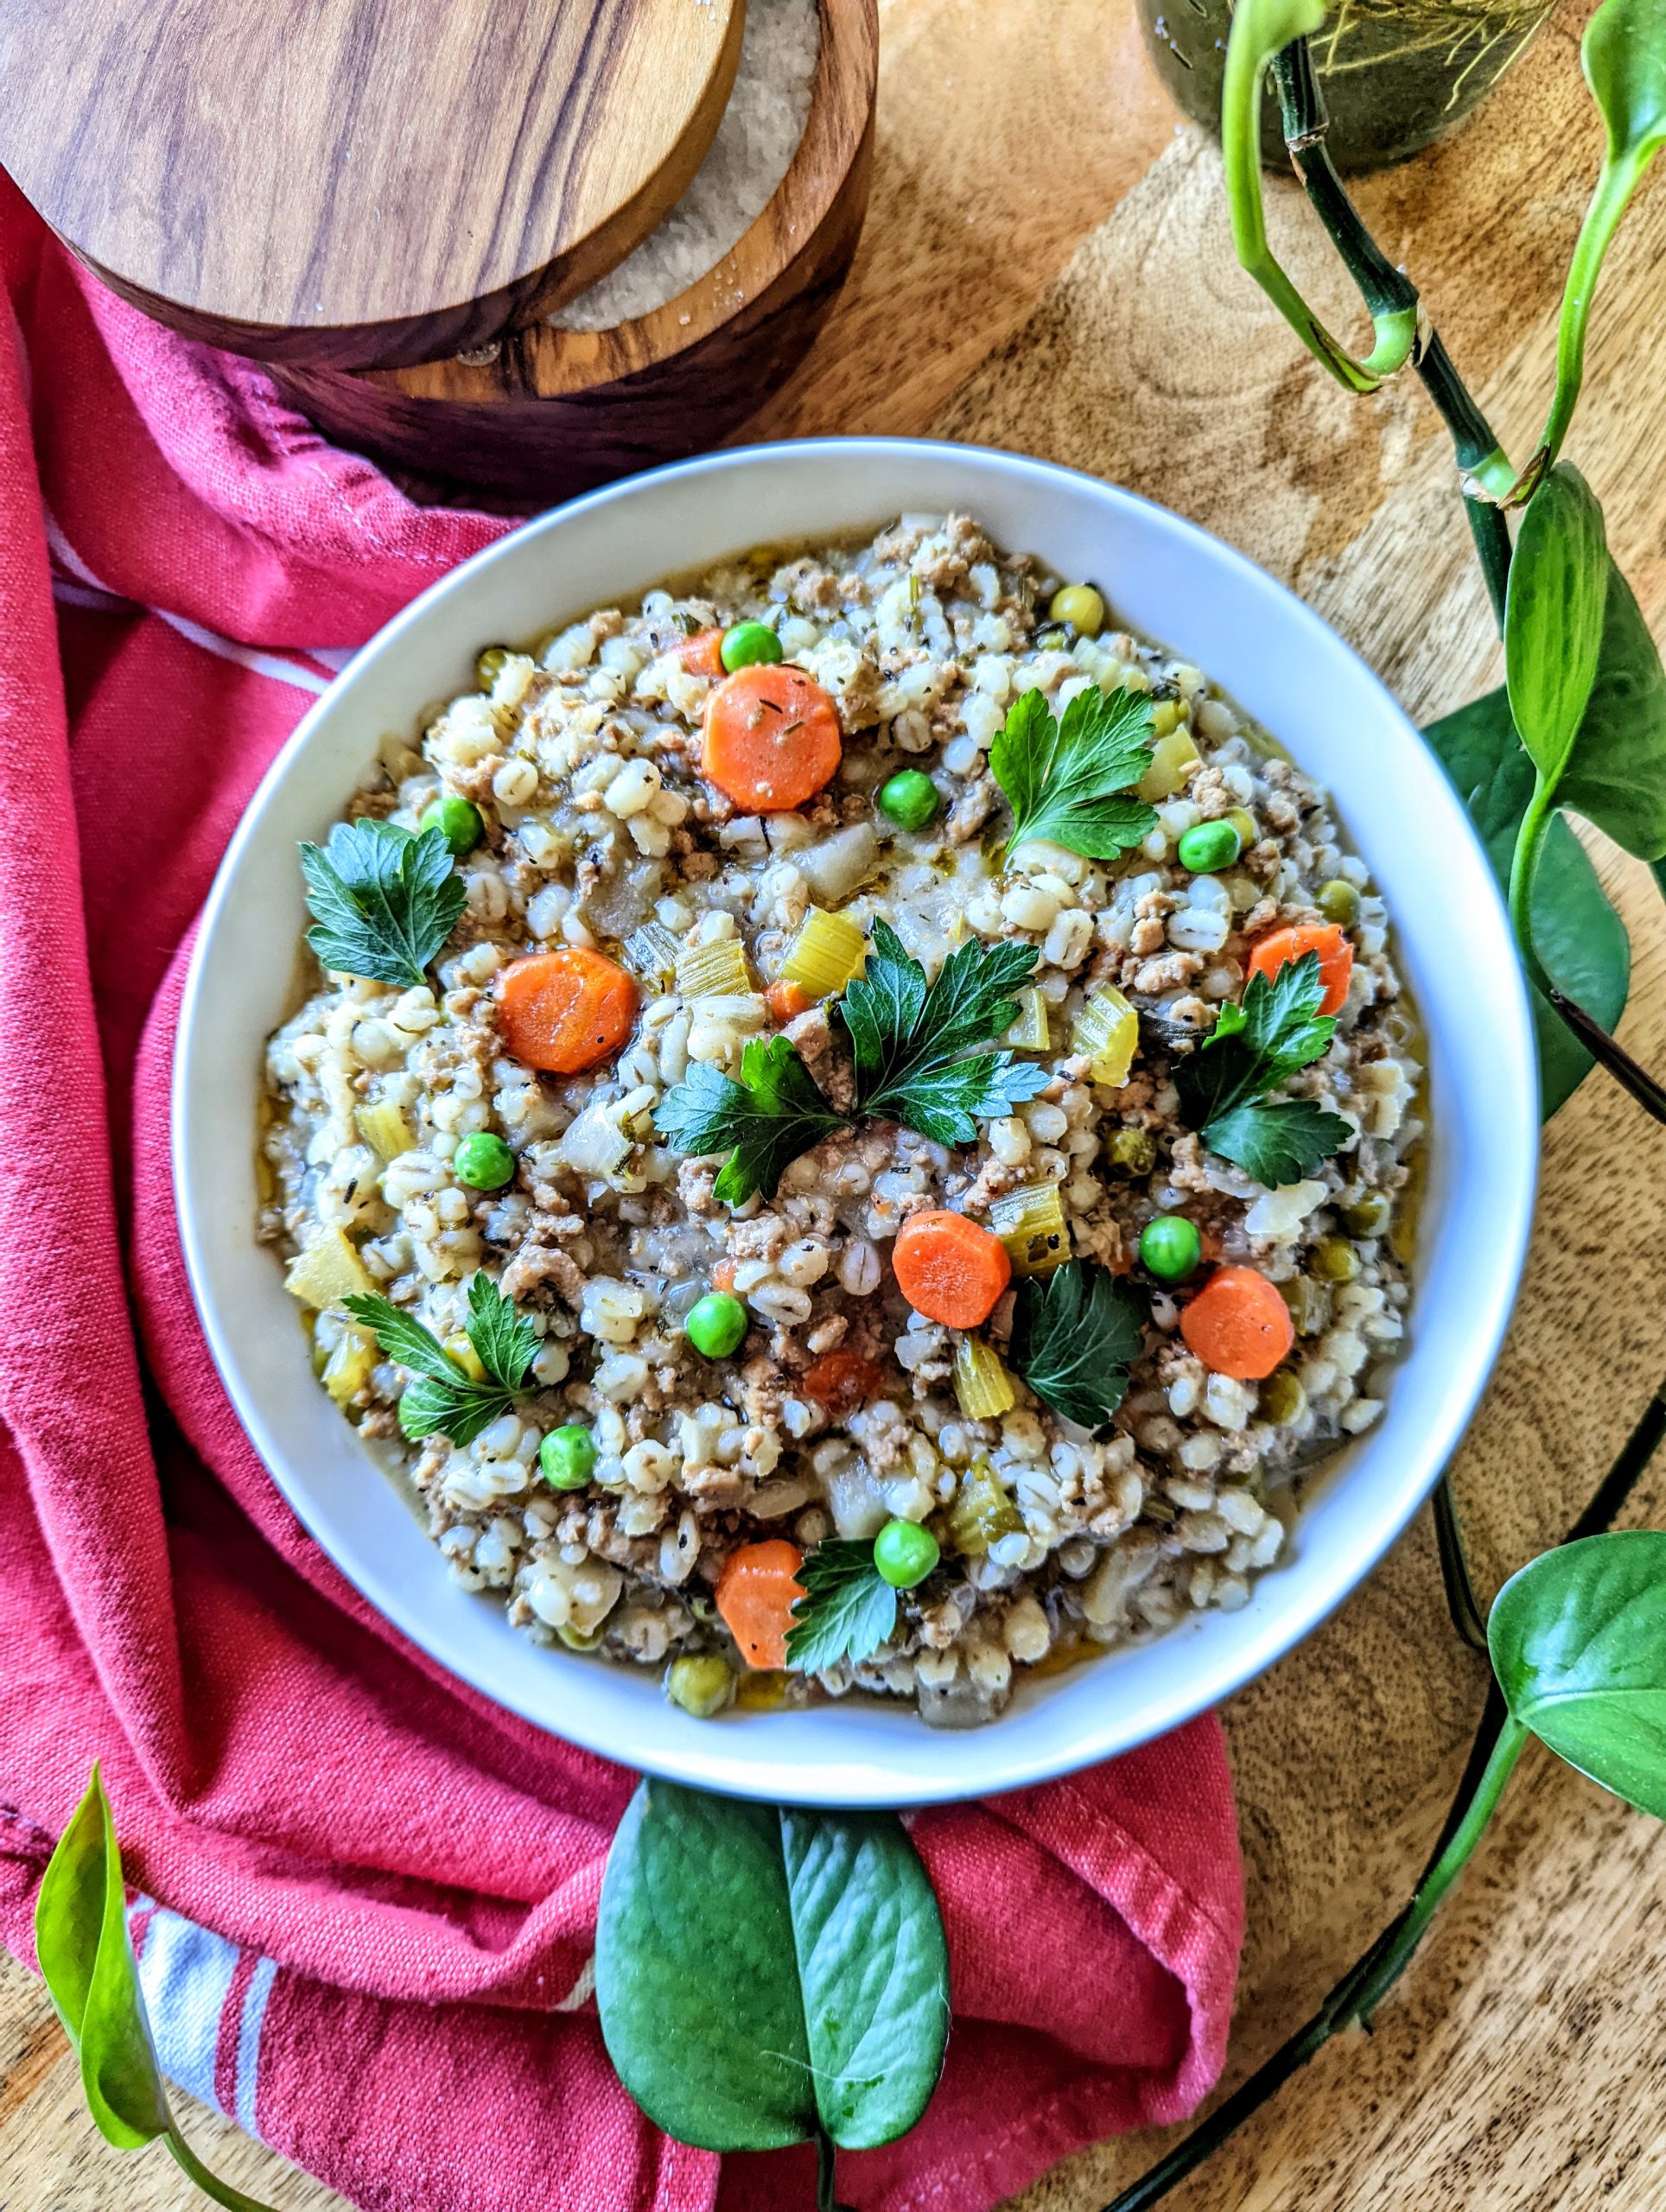 A bowl of turkey and barley soup full of orange carrots and green peas. A red kitchen towel is loosely wrapped around the shallow bowl and a string of greenery hangs to the right side.